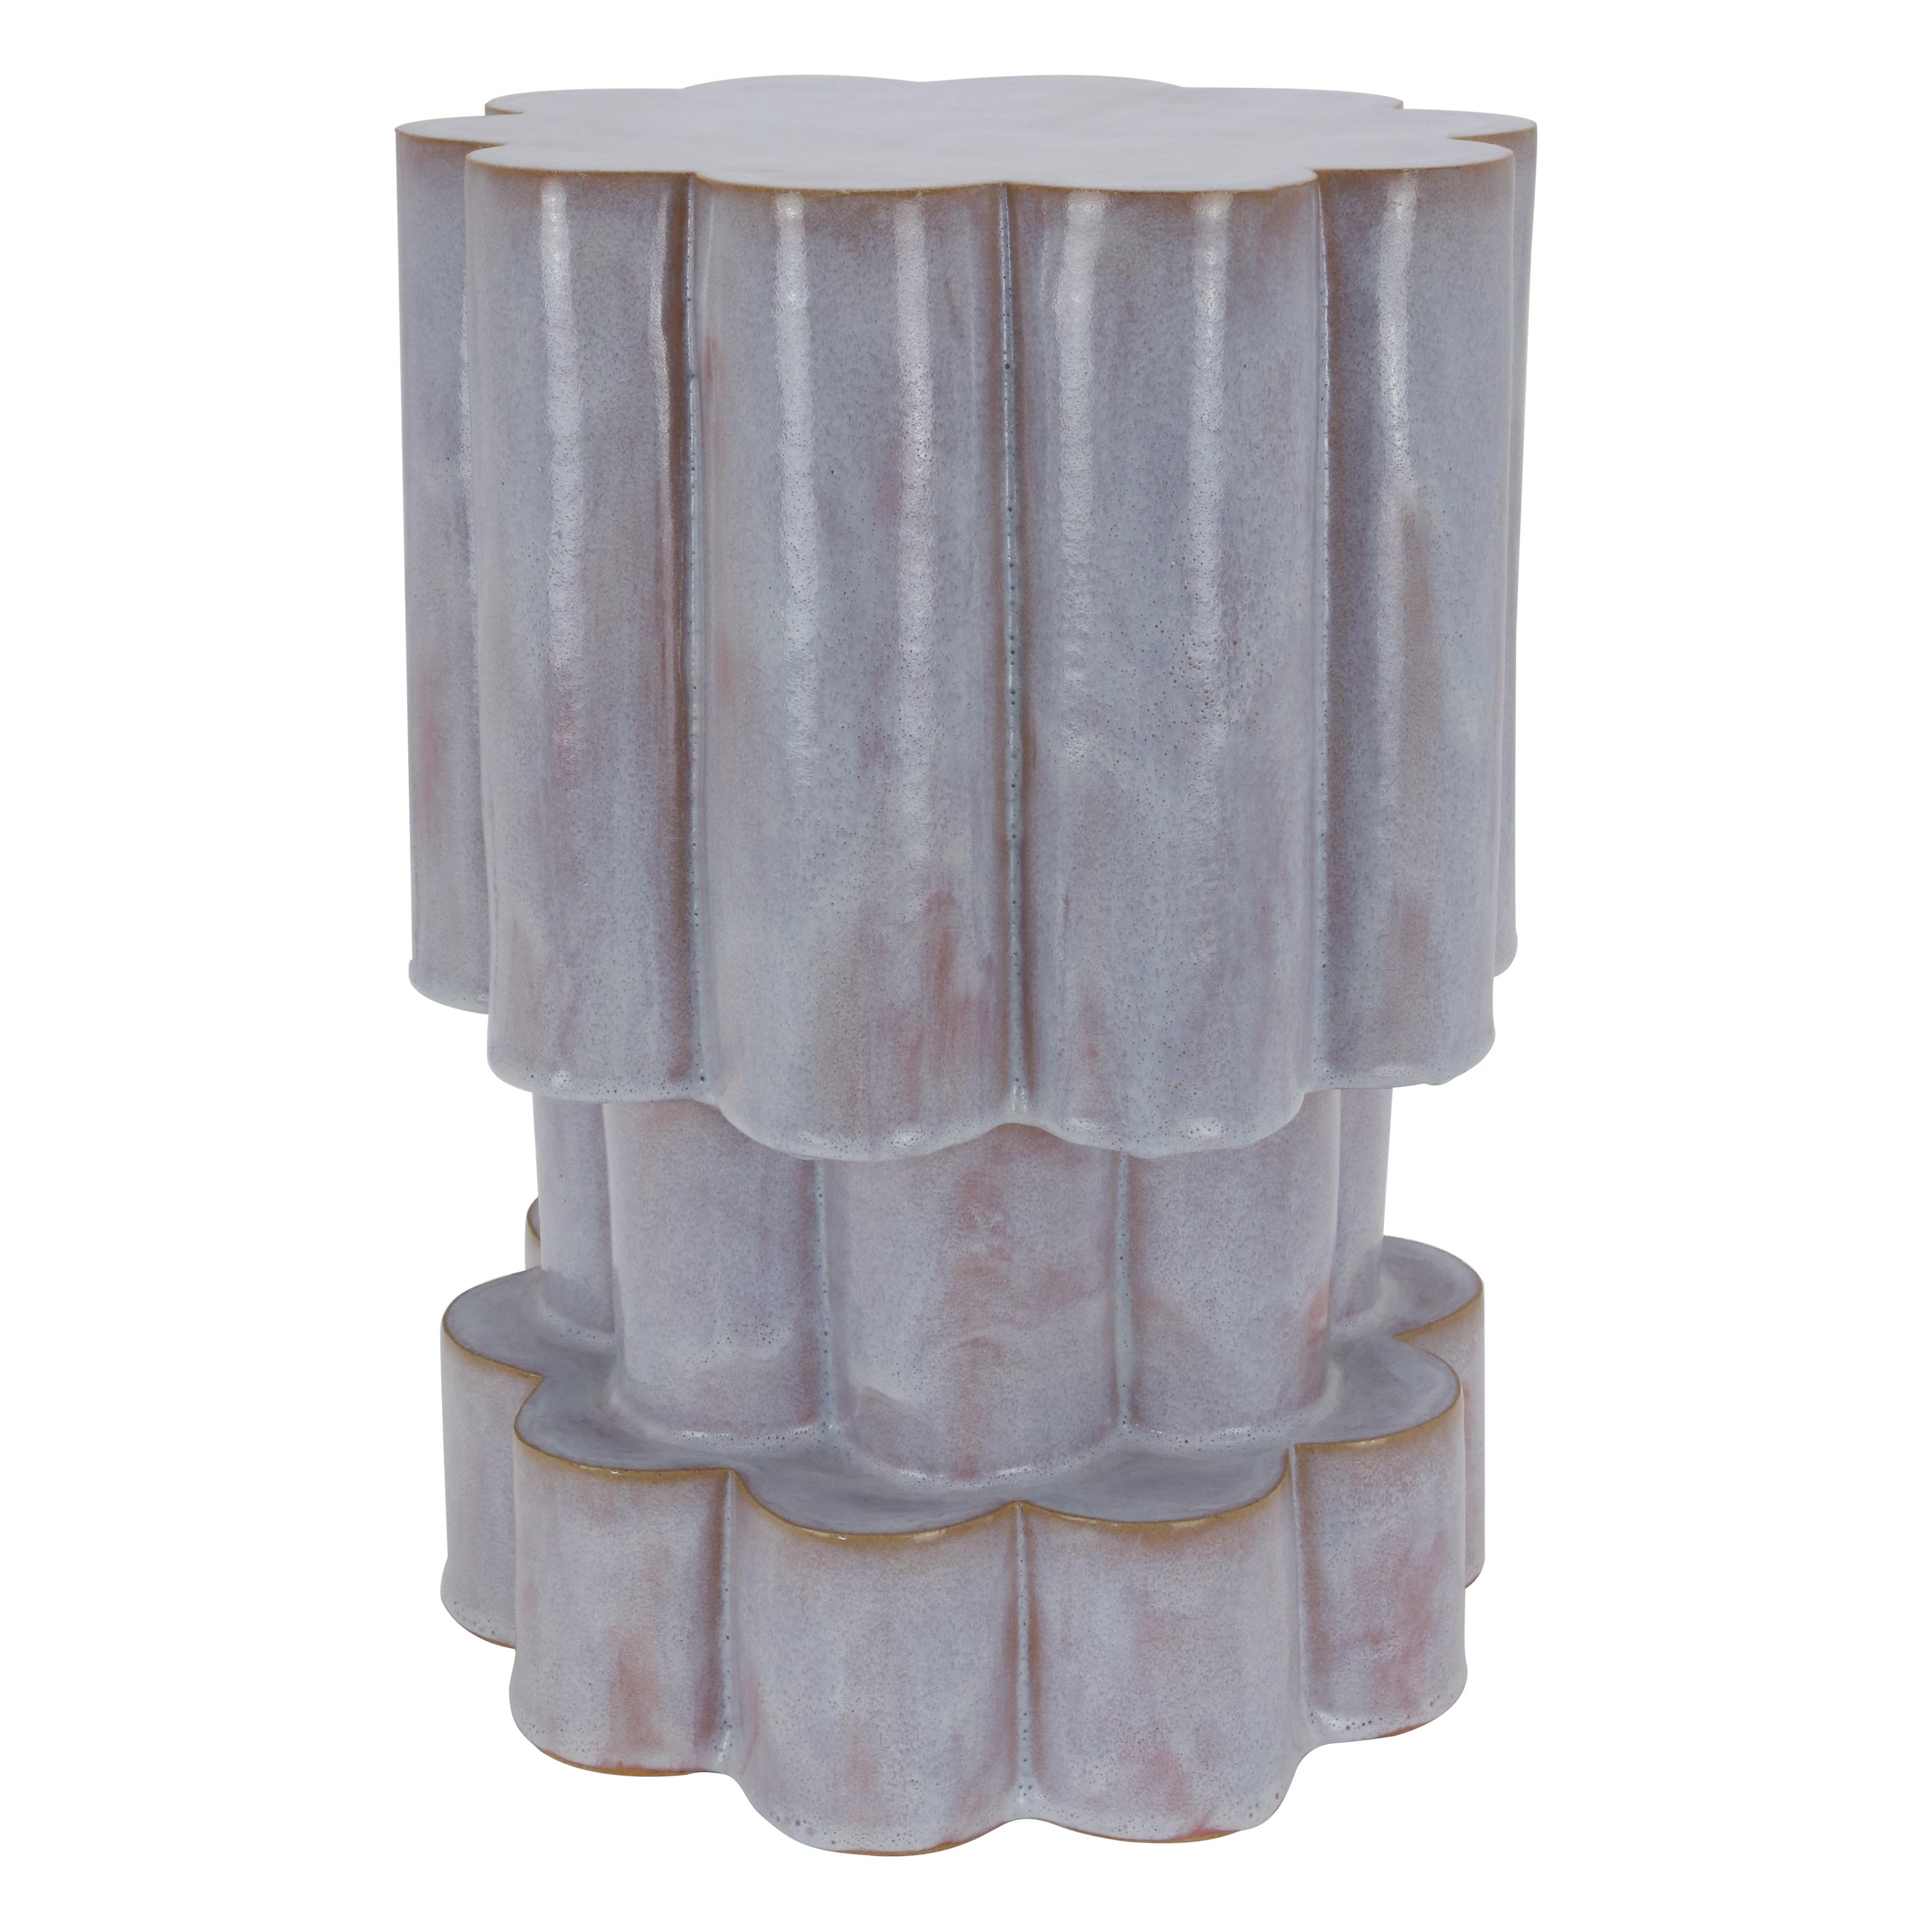 Three-Tier Ceramic Cloud Side Table & Stool in Pink Ice by BZIPPY